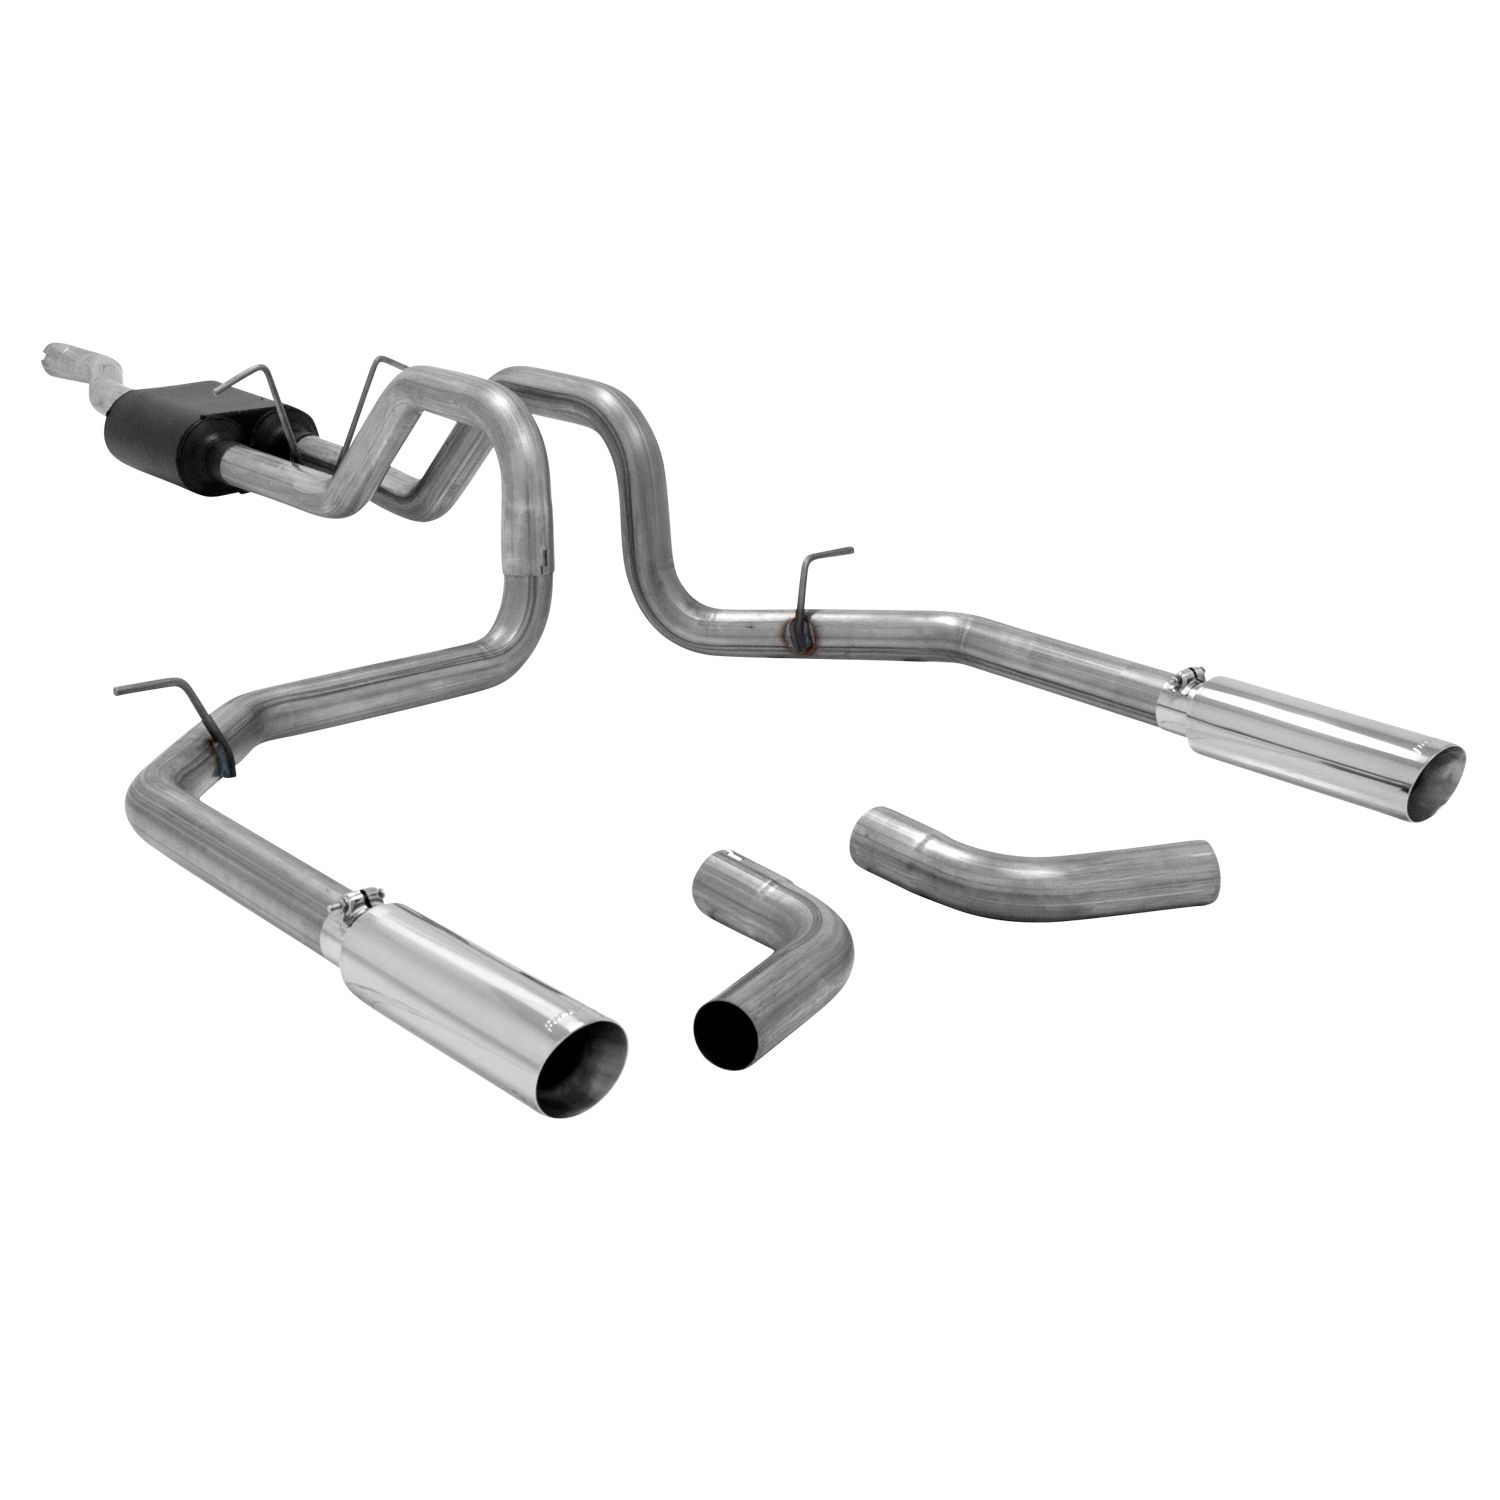 2001-2003 Ford F-150 King Ranch 4.6L/5.4L Flowmaster American Thunder Cat-Back Exhaust